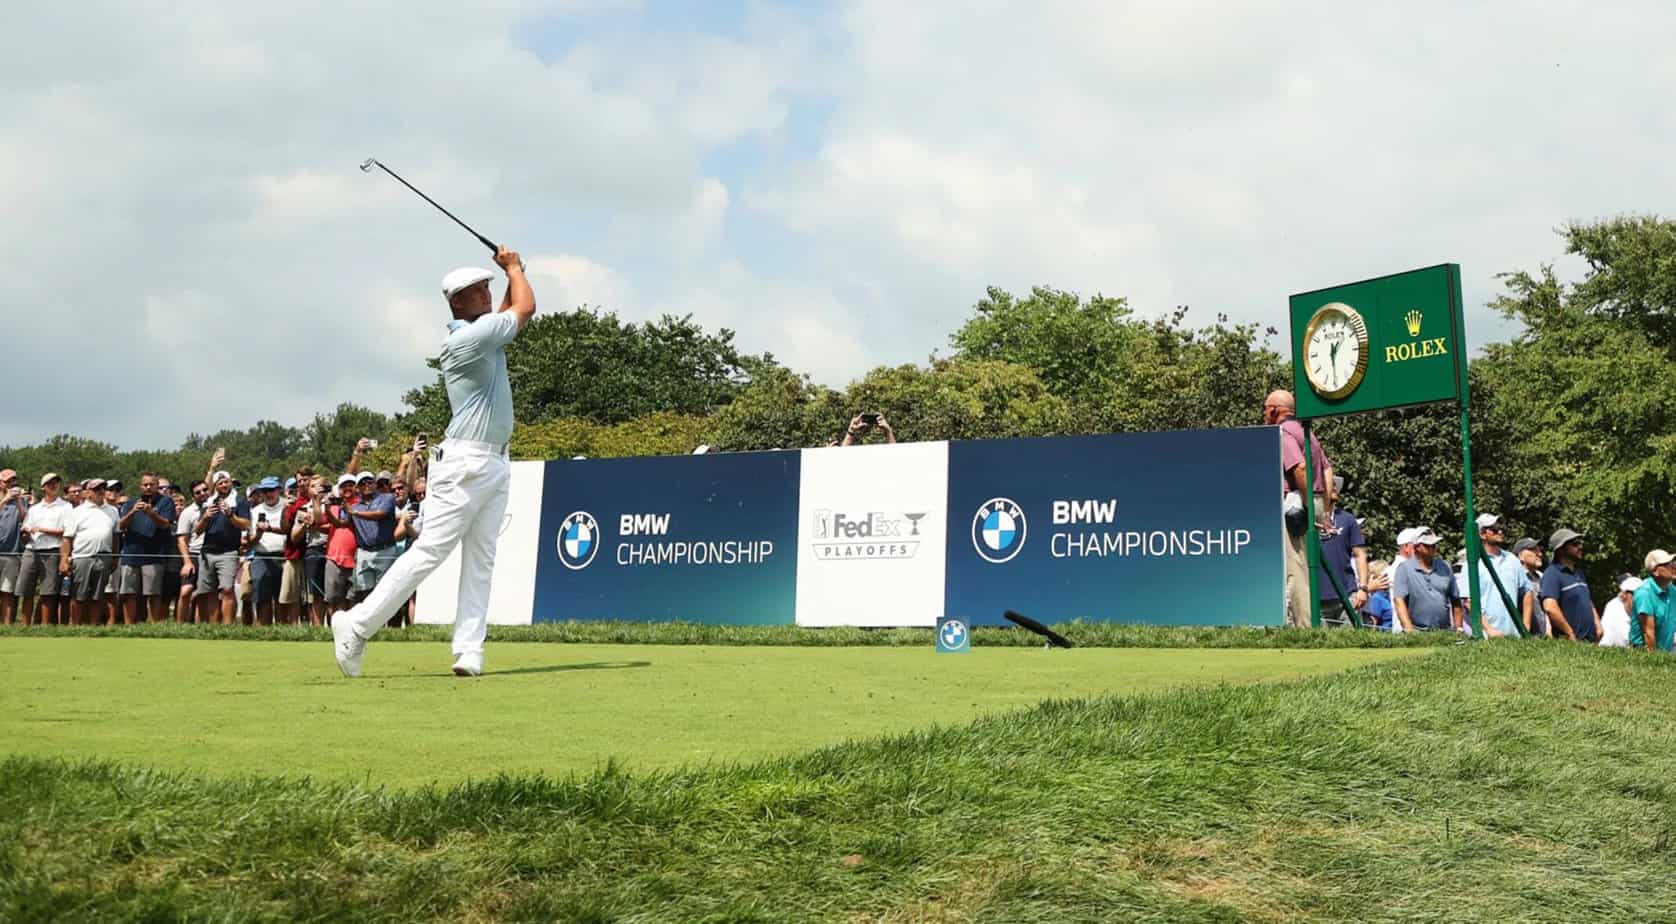 PGA BMW Championship – Preview and Betting Odds